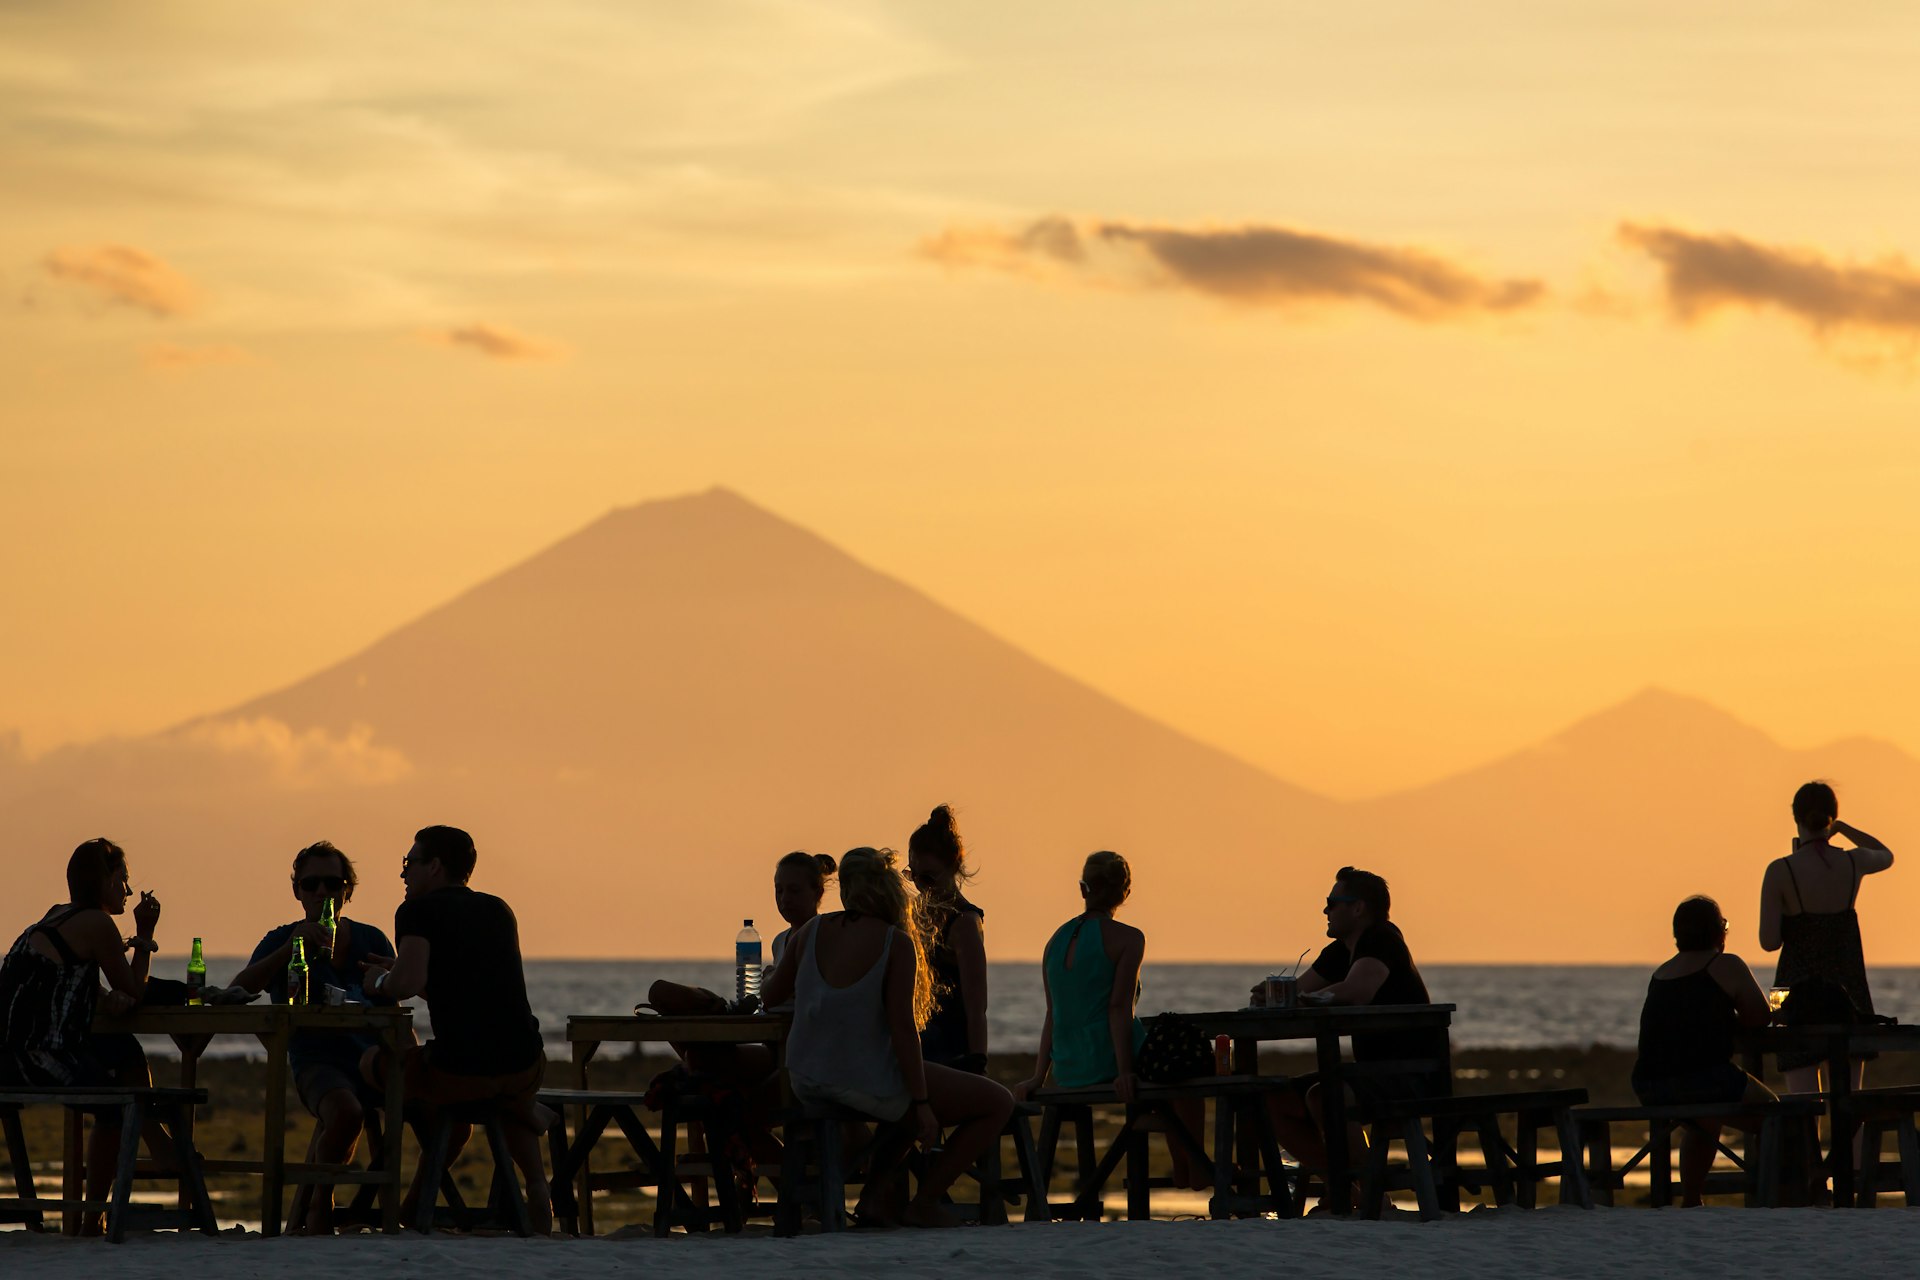 People at a beach bar are silhouetted as the sun sets behind a volcano